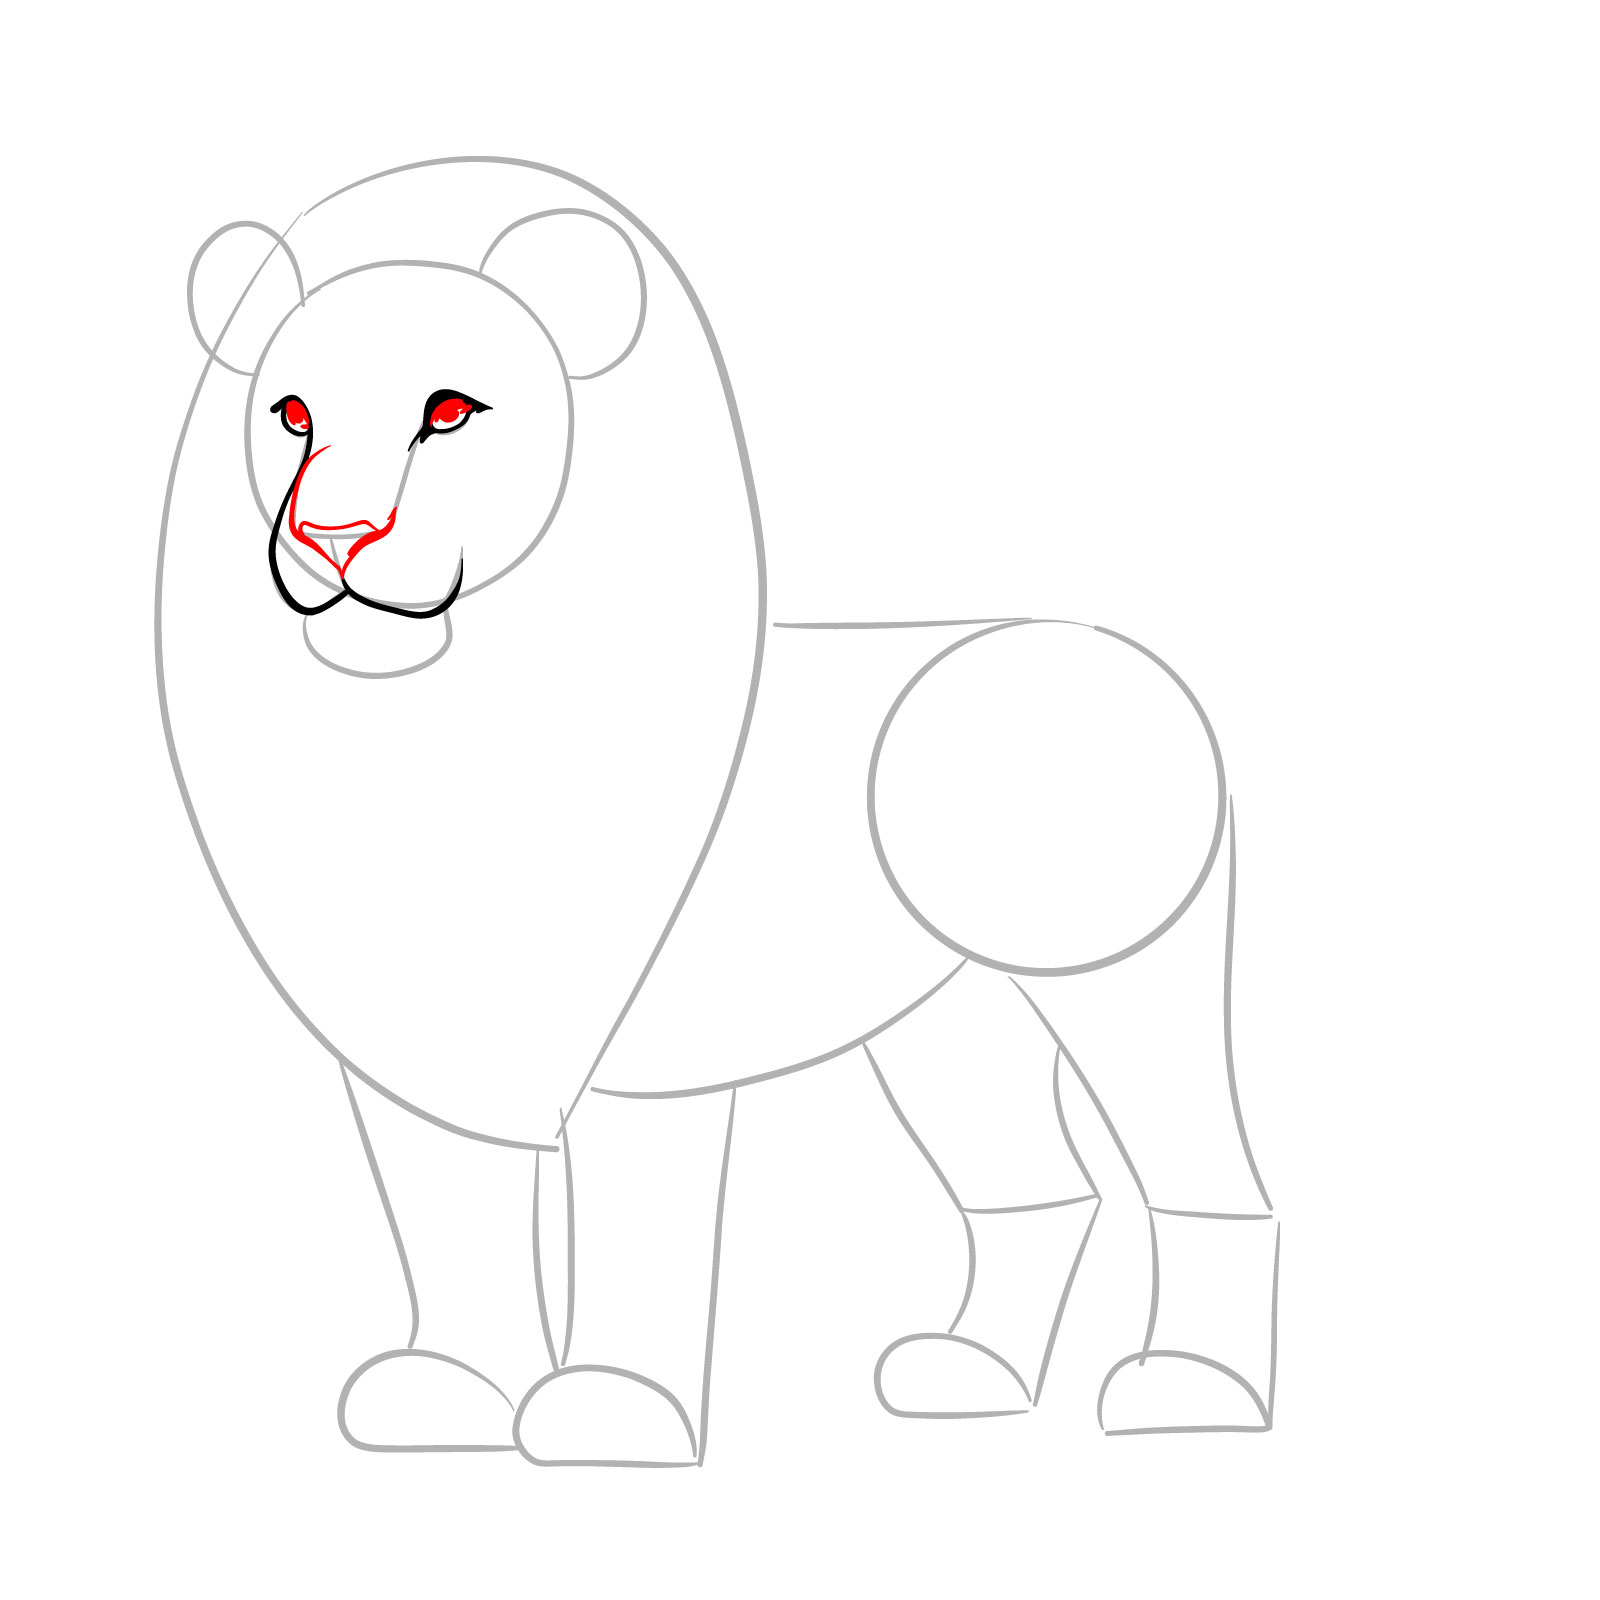 Step-by-step lion drawing guide for adding nose and eyes - step 04